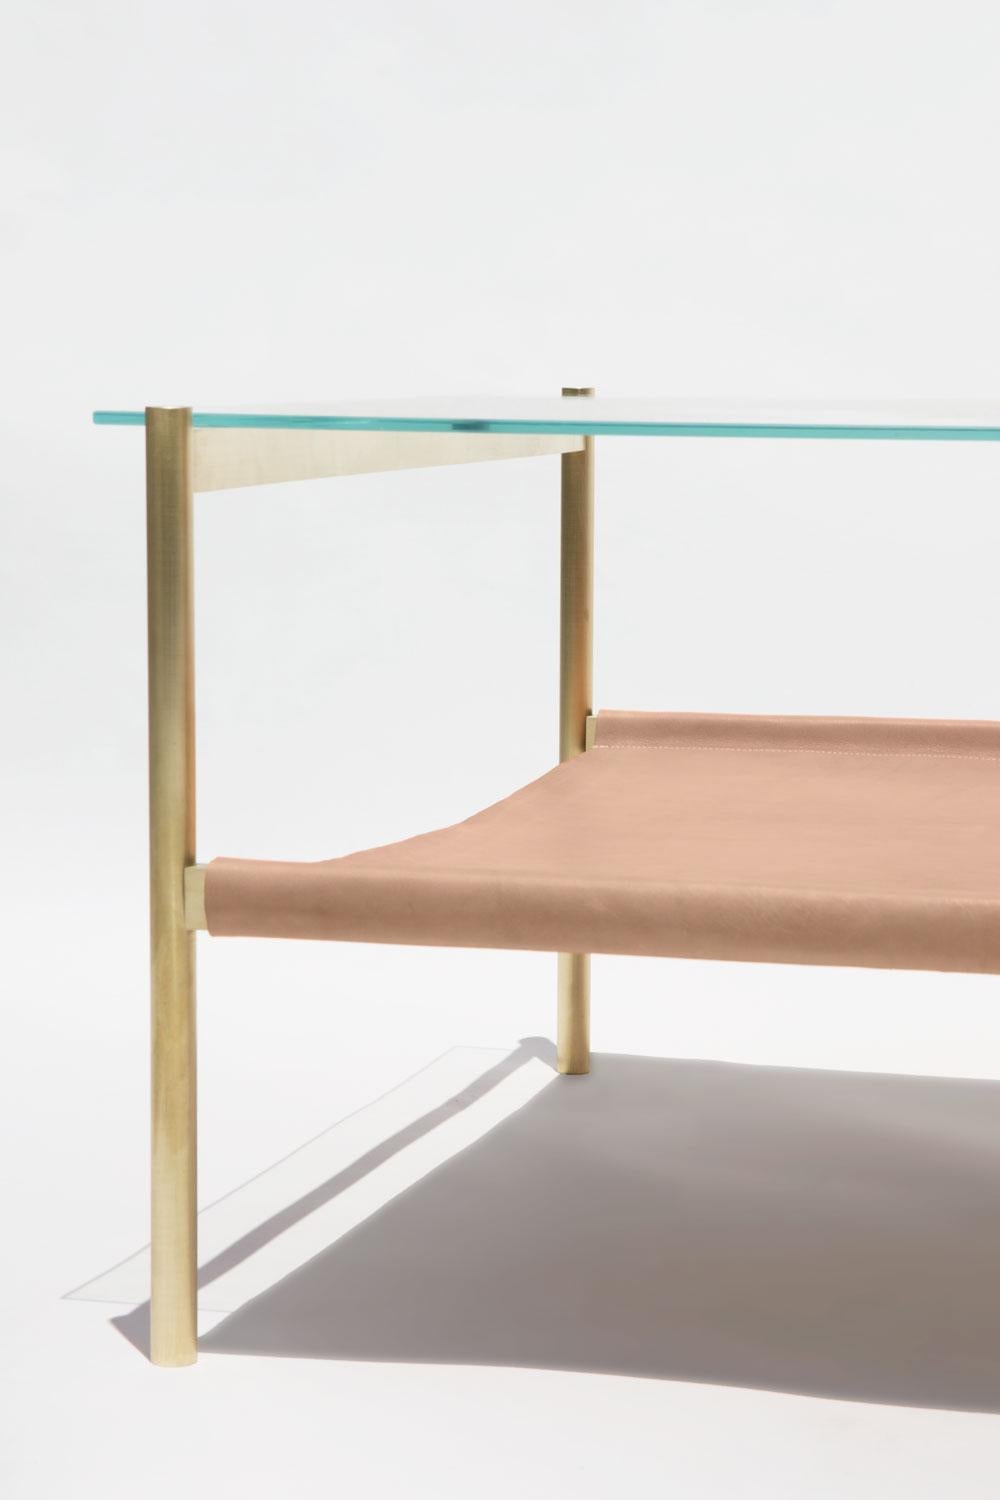 Made to order. Please allow 6 weeks for production.

Brass frame / Clear glass / Natural leather sling.

The Duotone Furniture series is based on a modular hardware system that pairs sturdy construction with visual lightness and a range of